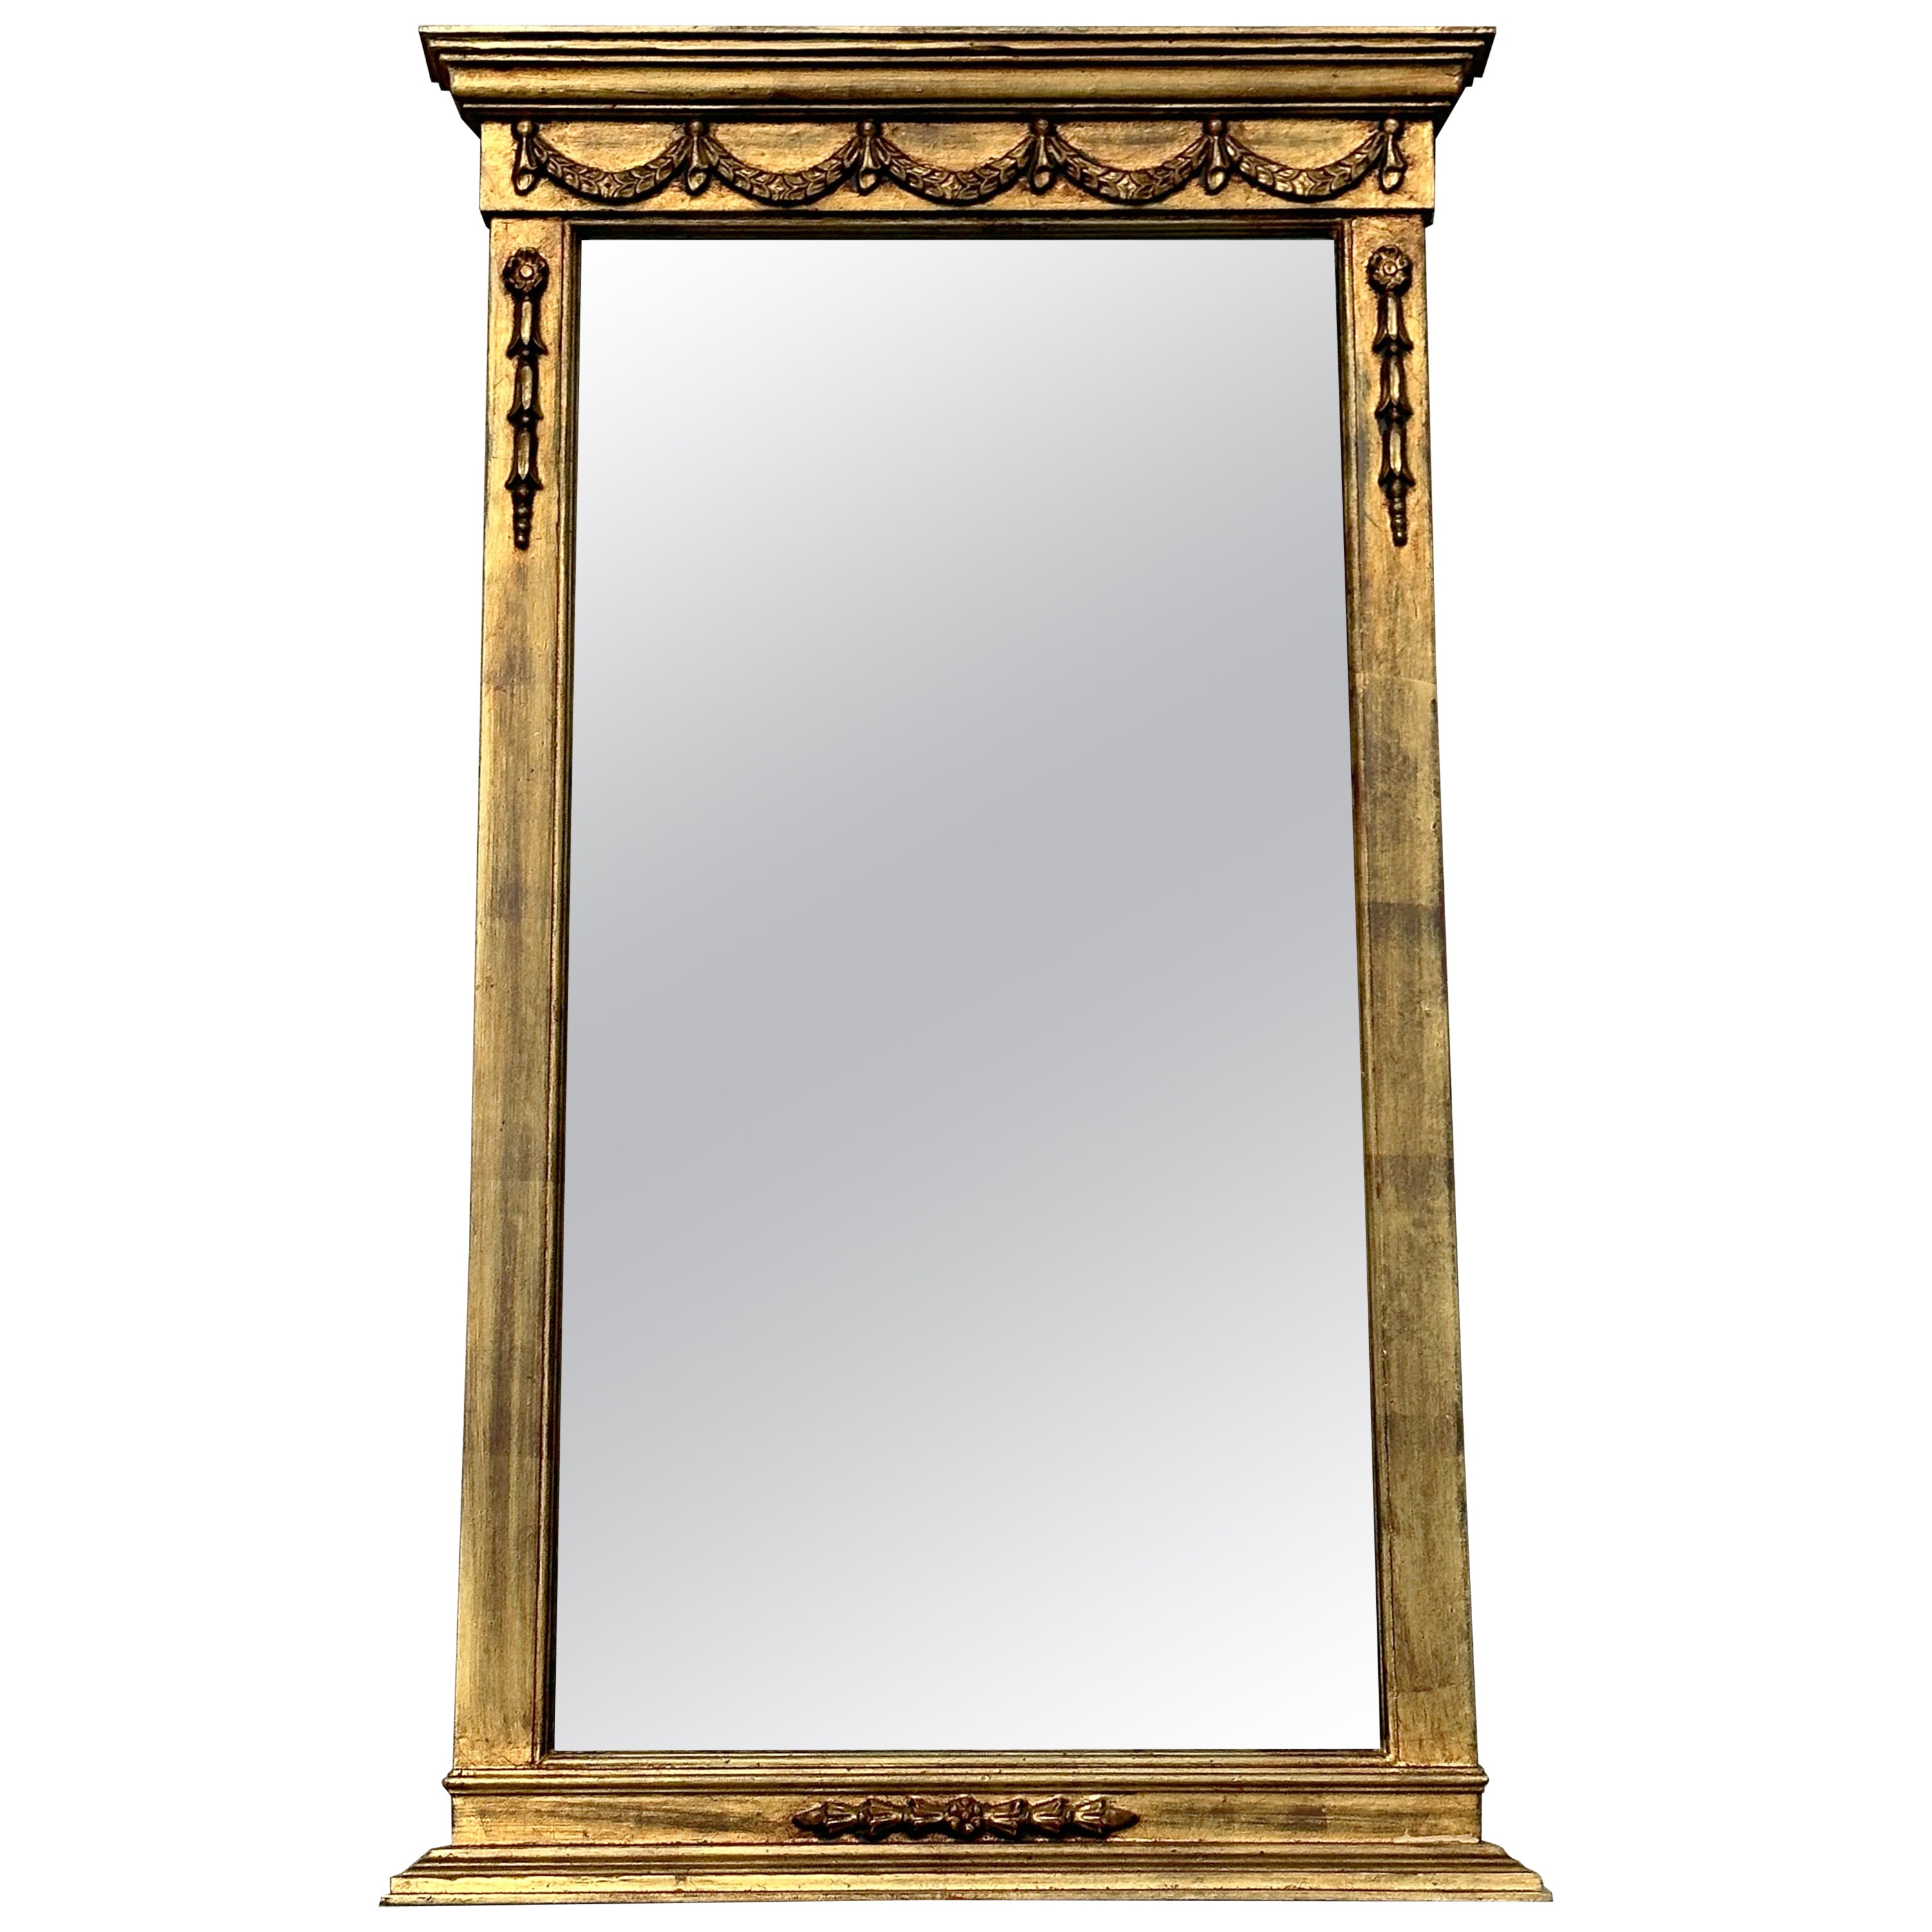 Vintage circa 1950s Gilt Framed Wall Mirror Stamped Made in Italy to the Rear (Miroir mural à cadre doré estampillé Made in Italy à l'arrière)